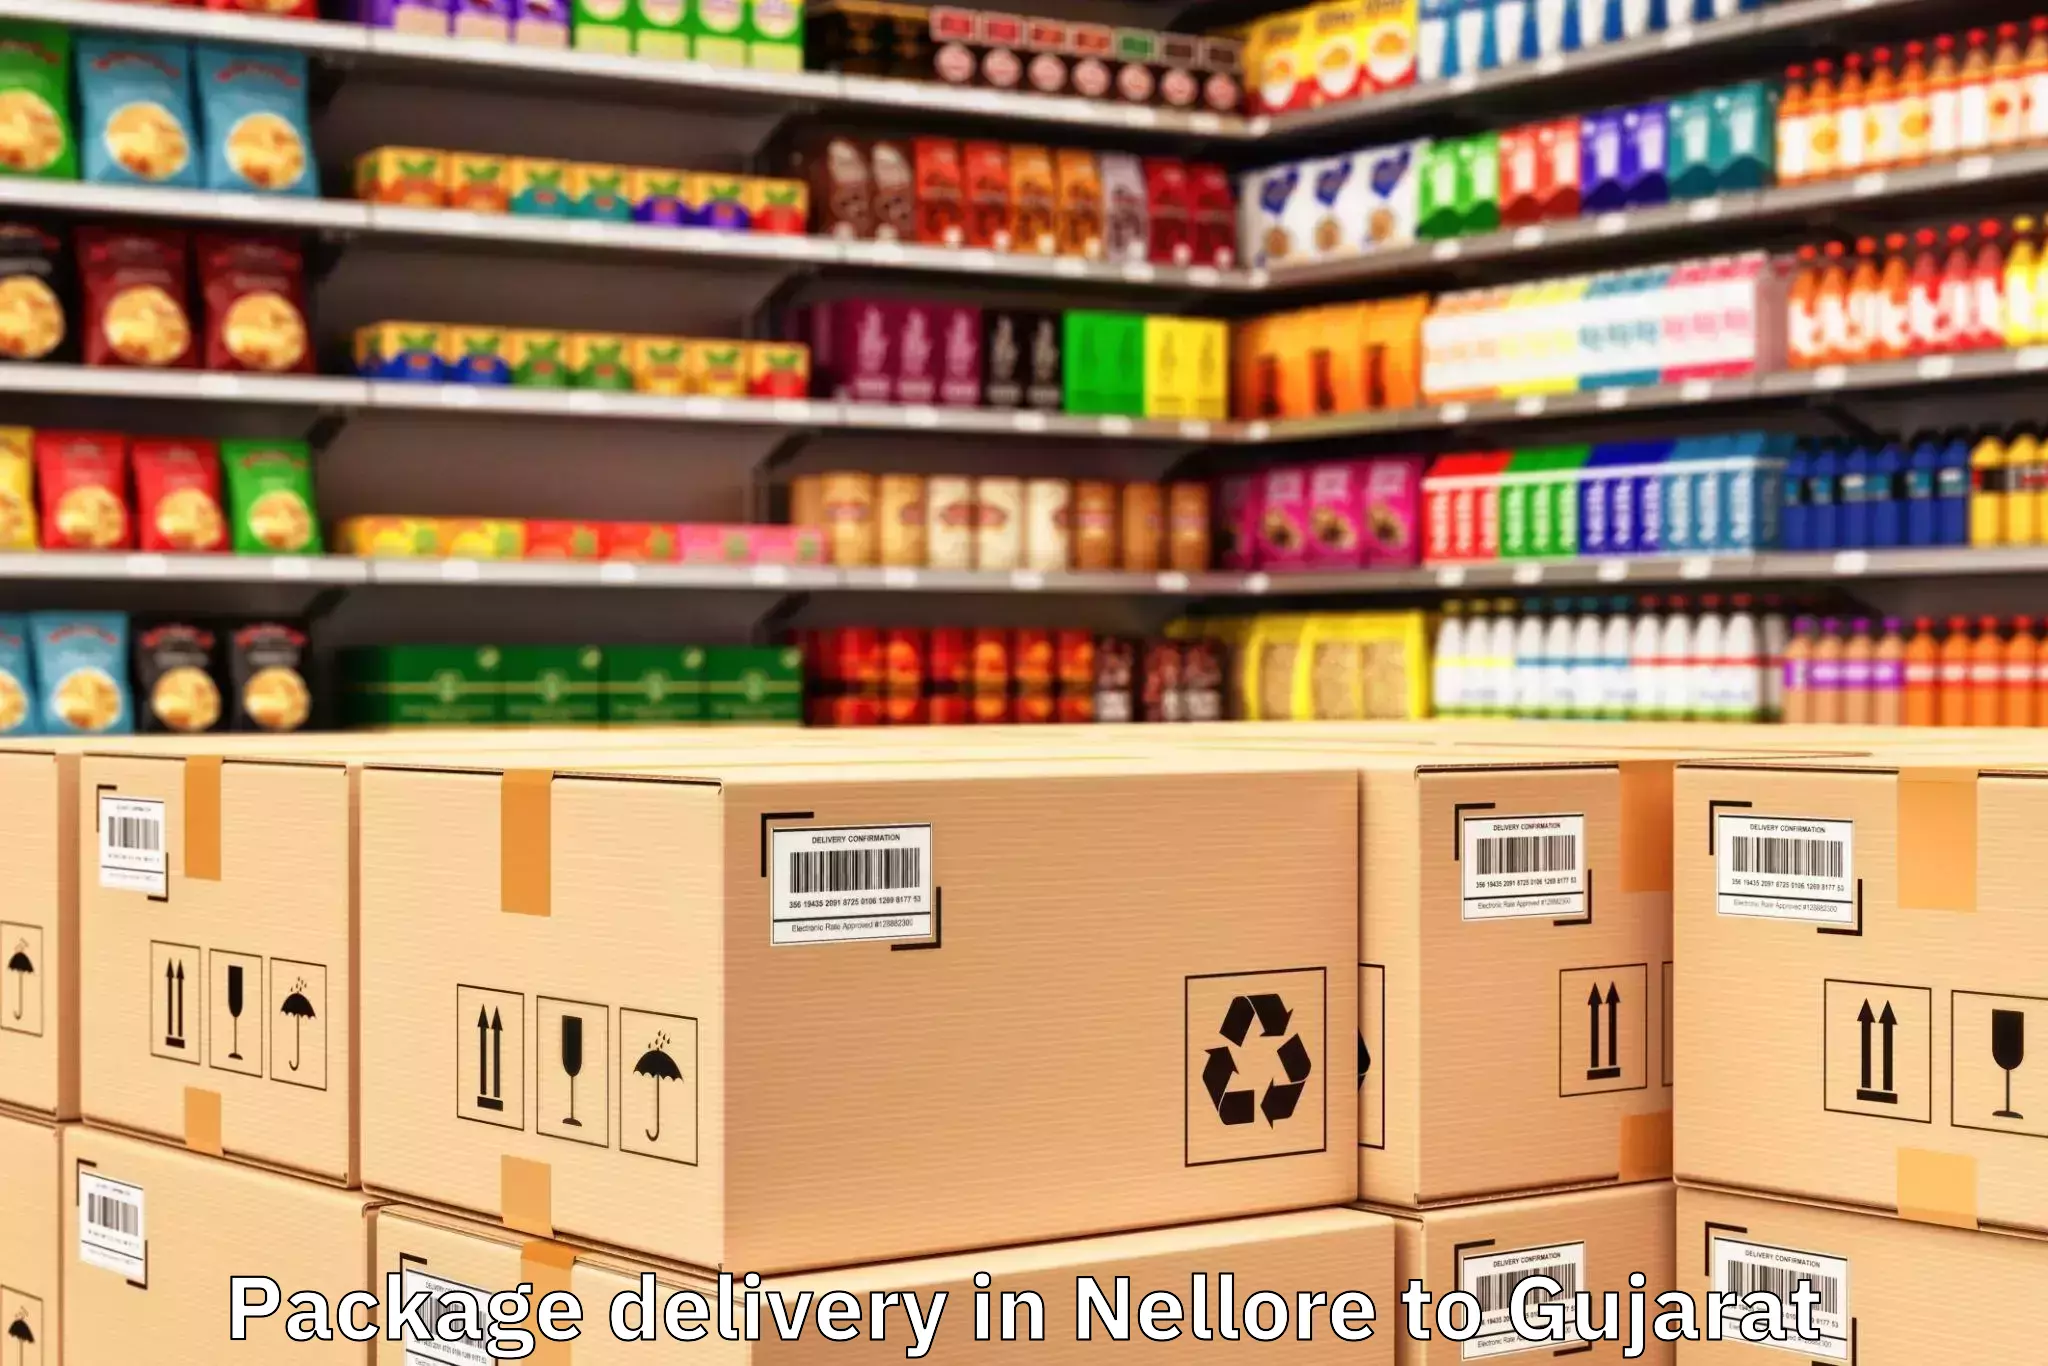 Expert Nellore to Tilakvada Package Delivery